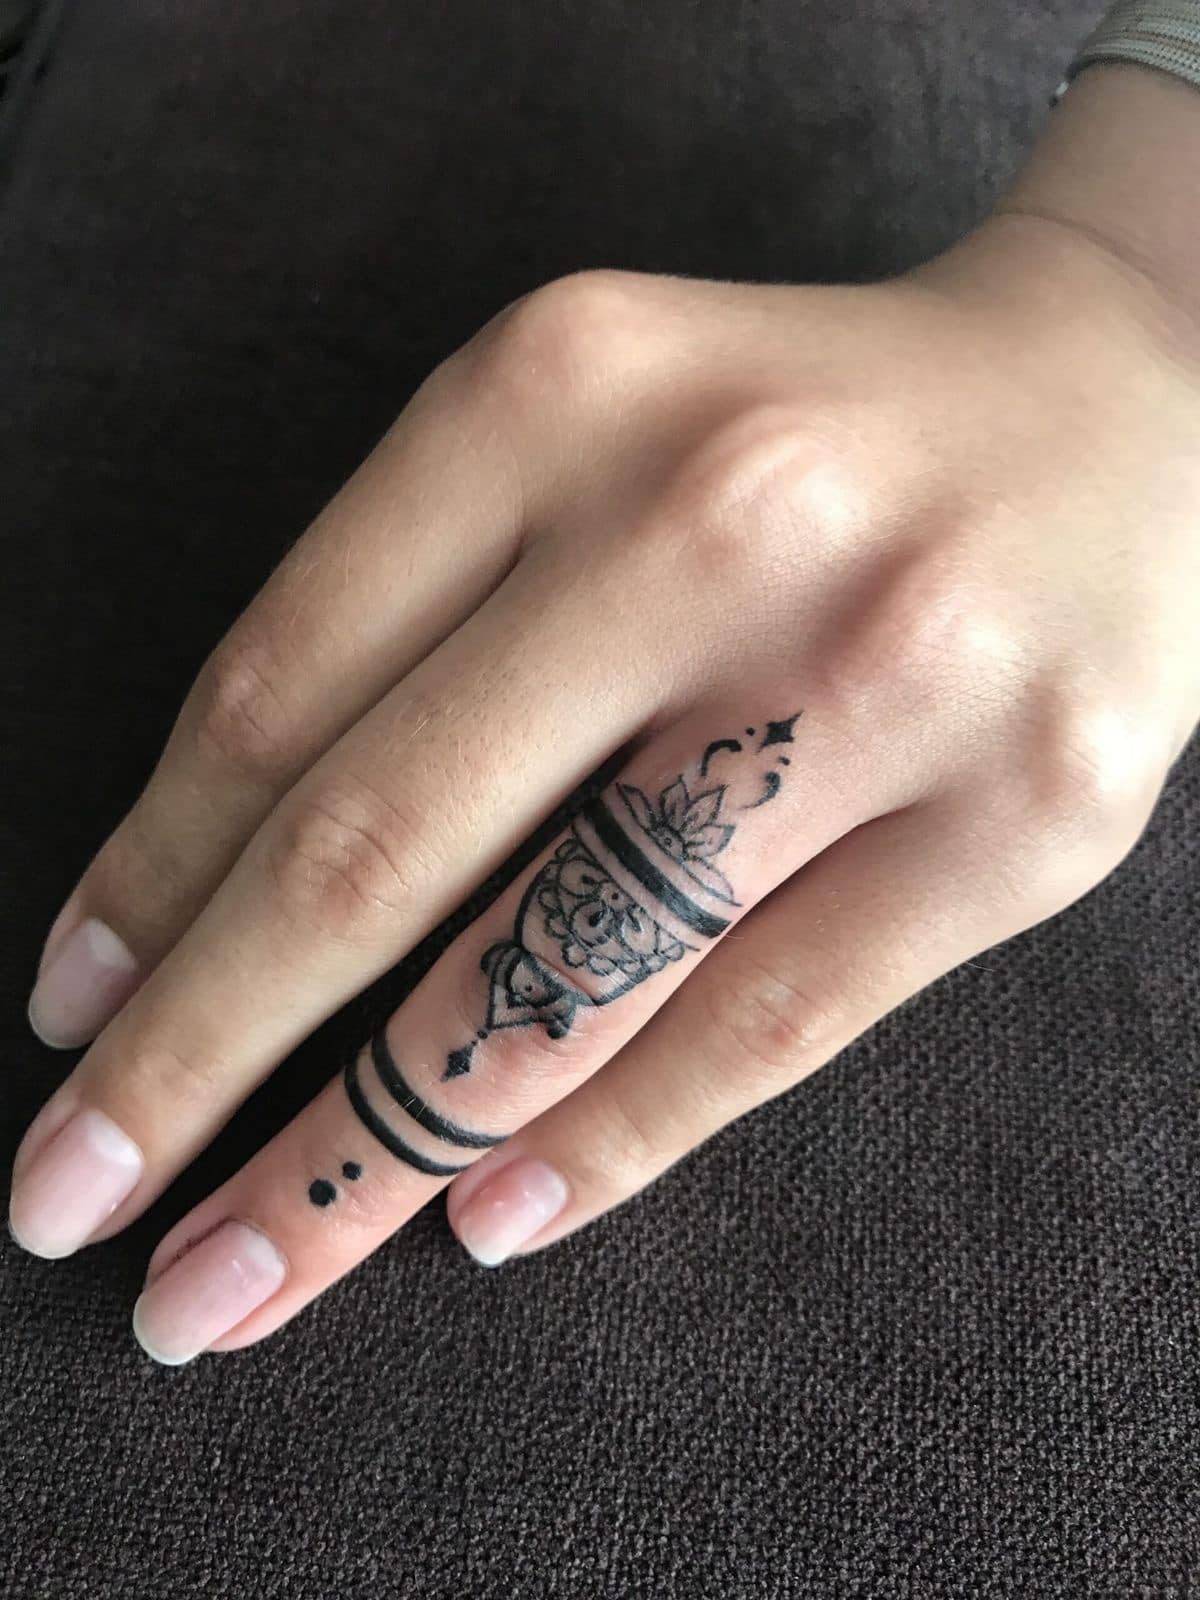 25 Dainty Finger Tattoos To Bring Out Your Beauty